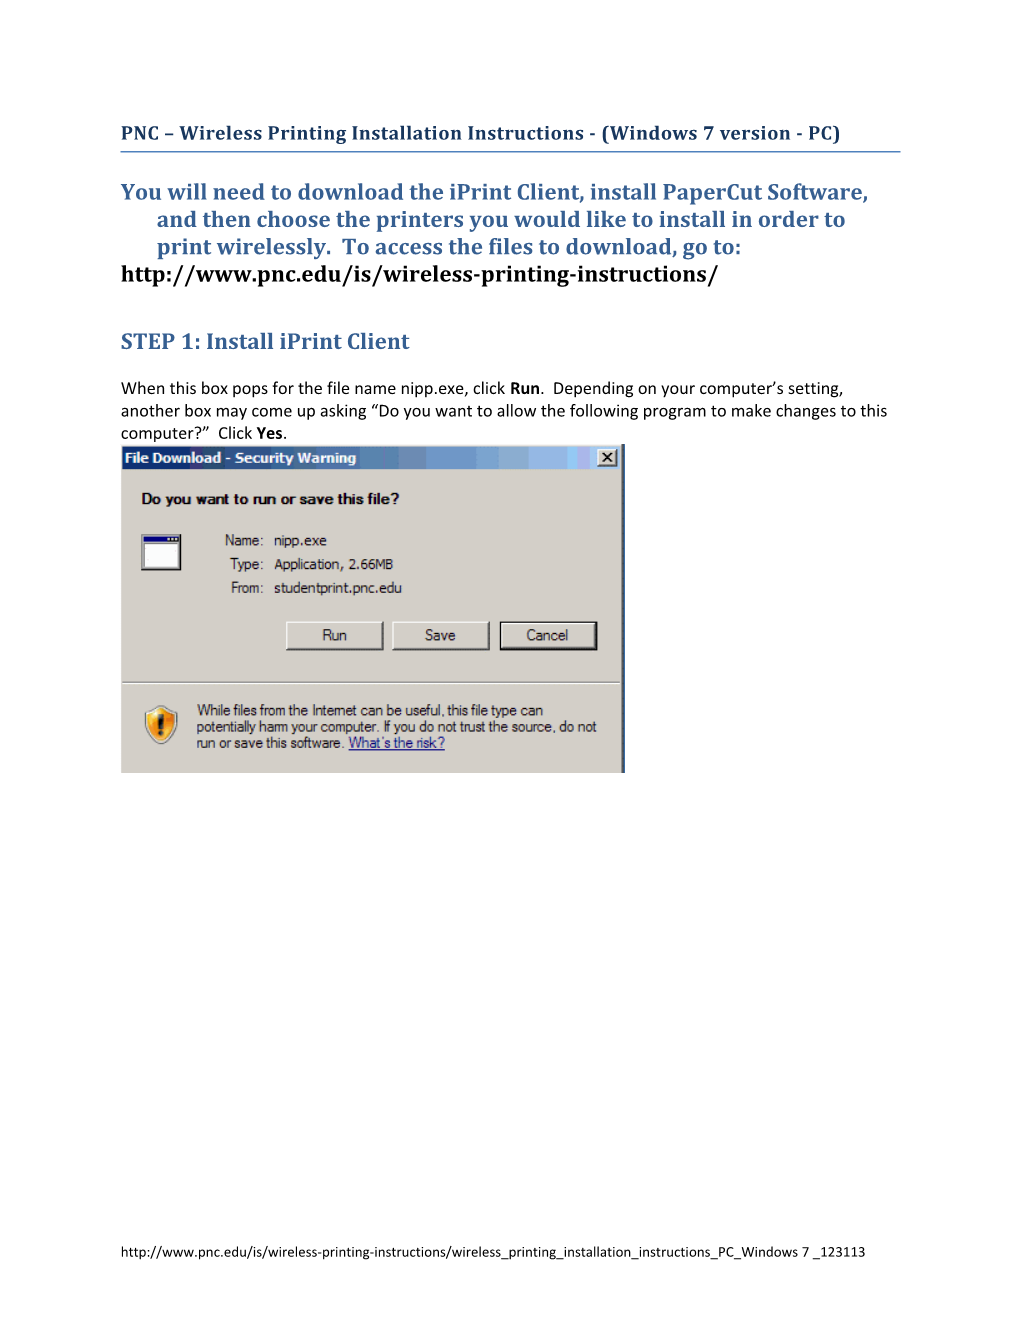 Wireless Printing Installation Instructions for Windows 7 Users